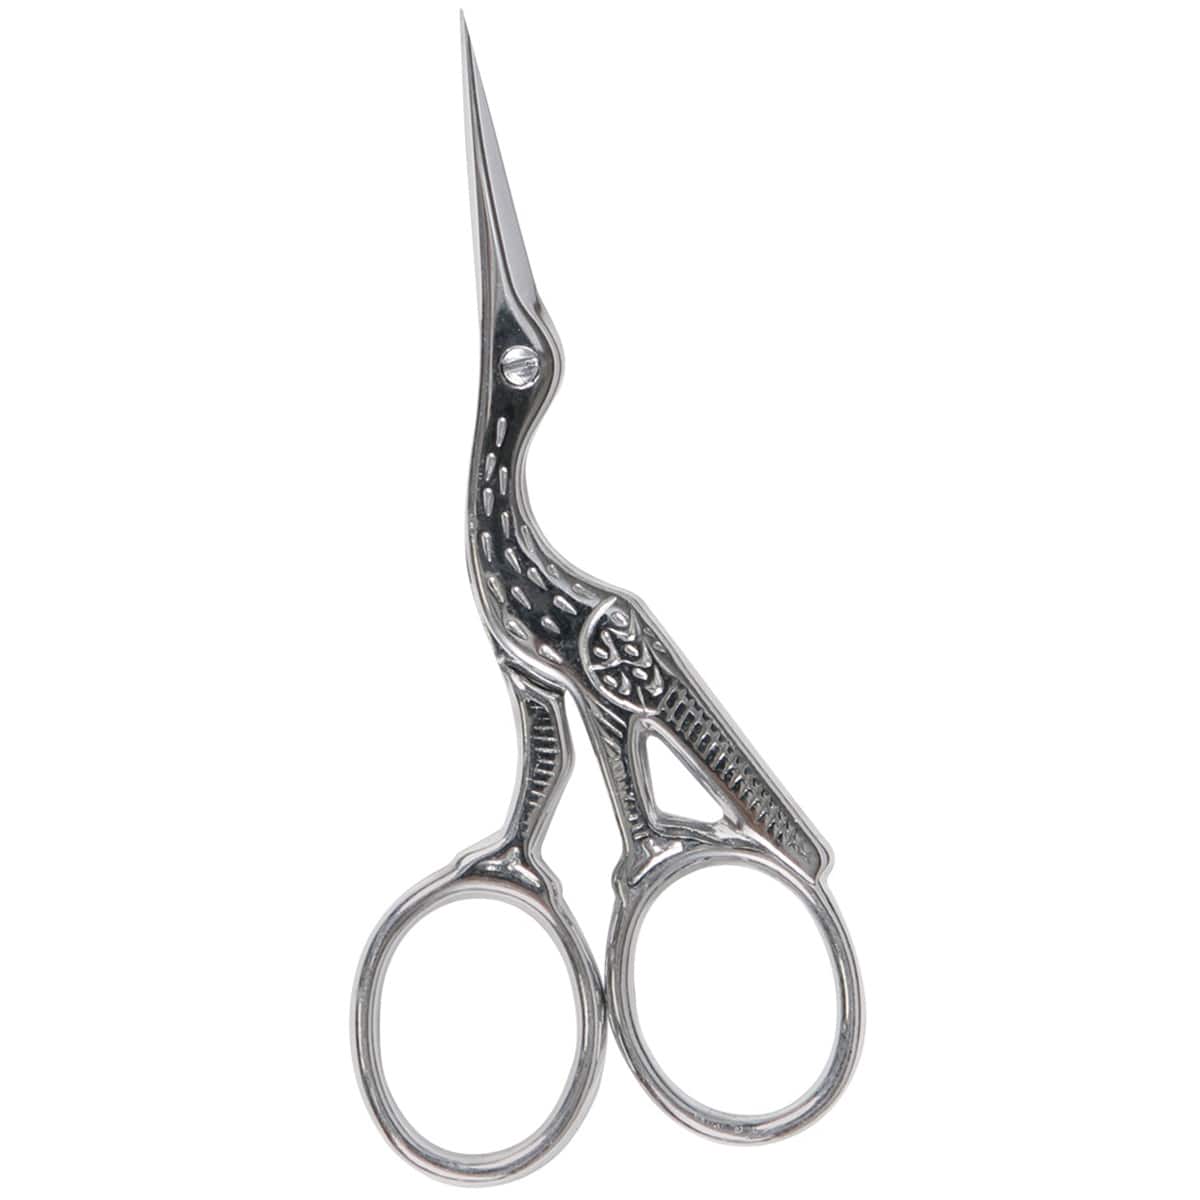  Silver Scissors for Cutting Handmade Craft Embroidery